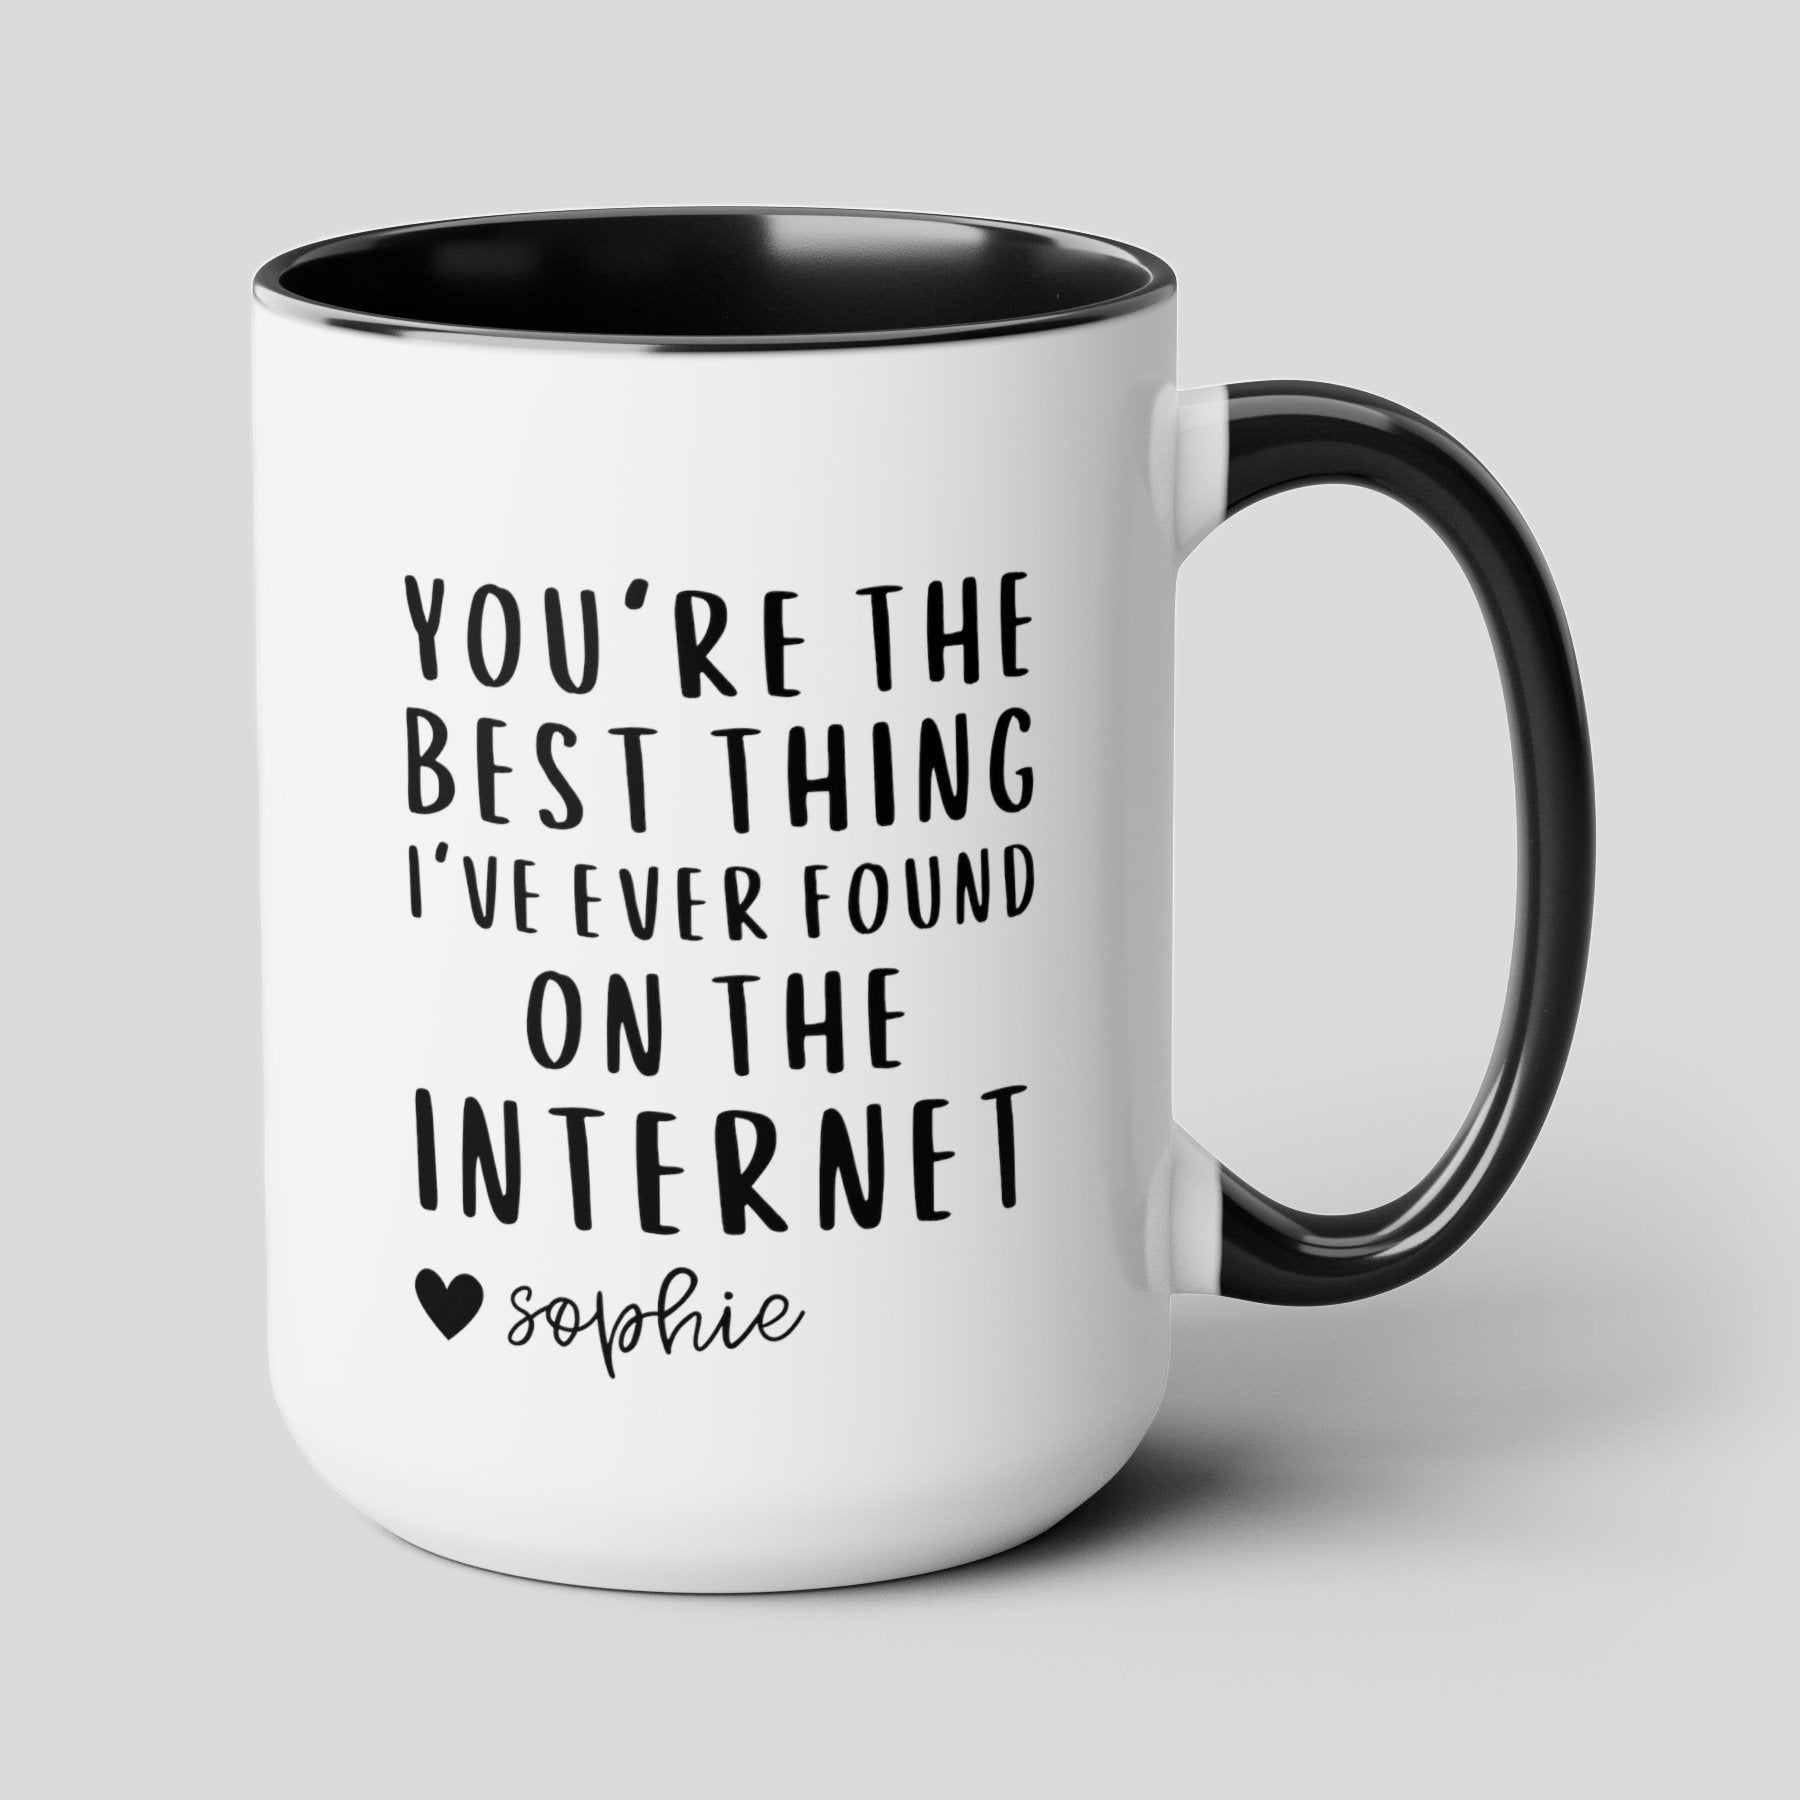 you are the best thing ive ever found on the internet personalized custom 15oz white with black accent funny coffee mug tea cup gift valentines anniversary boyfriend girlfriend online dating match waveywares wavey wares